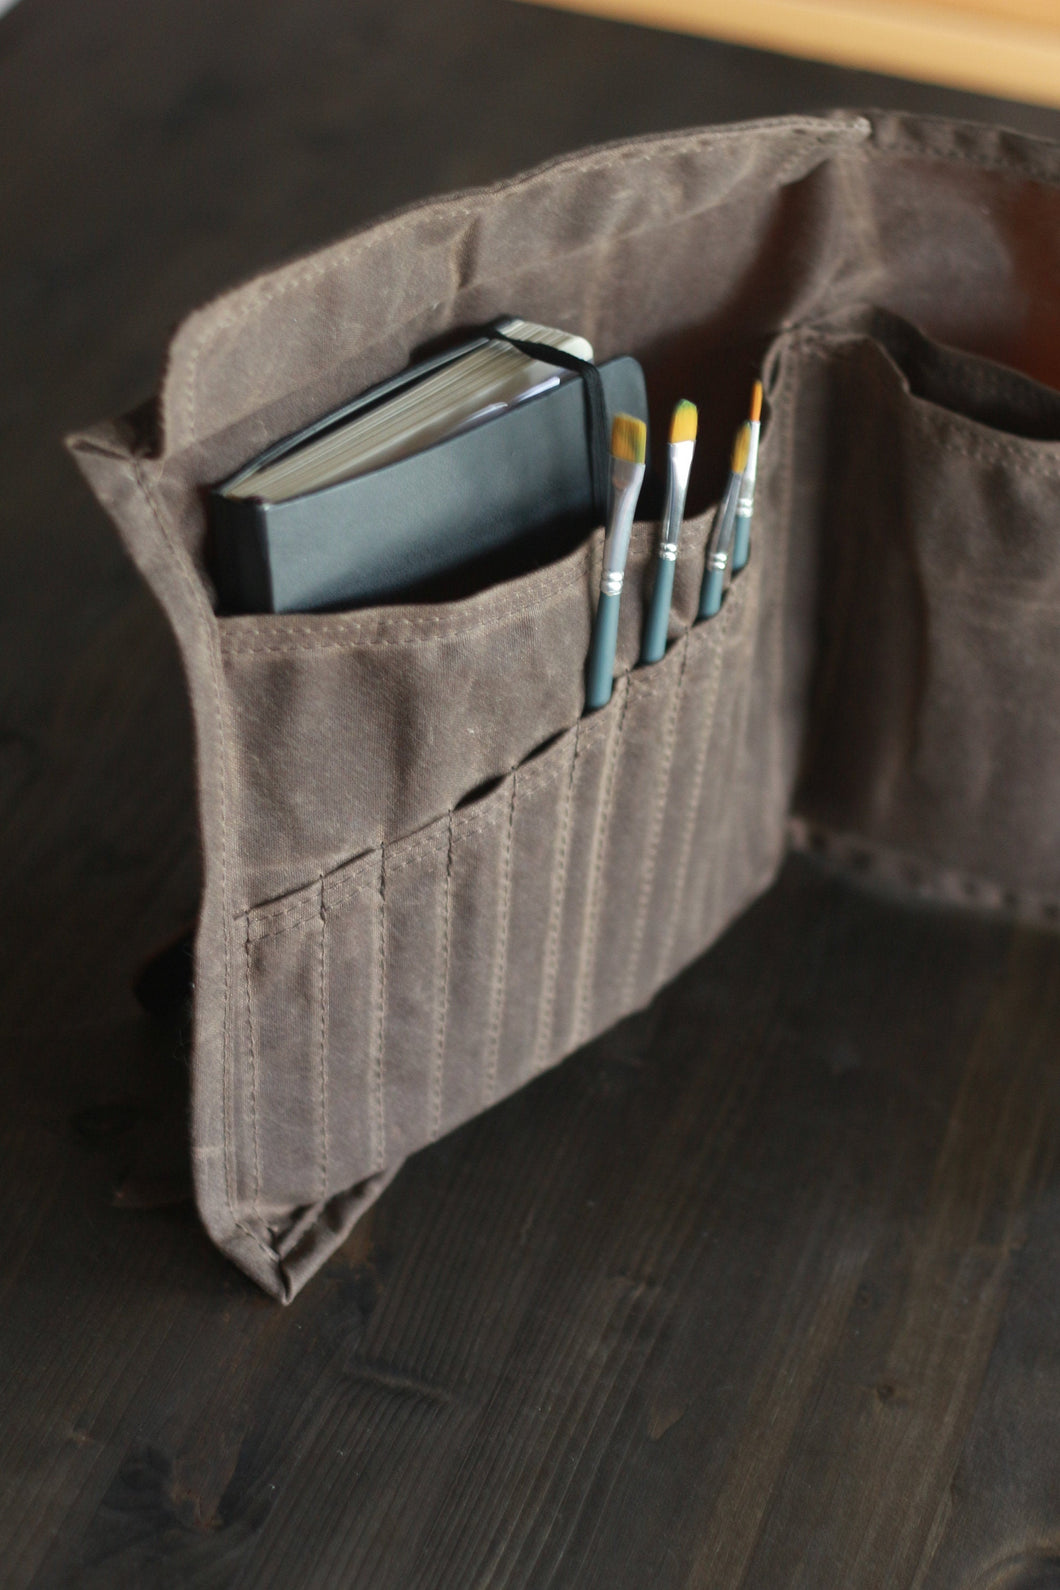 Leather Pencil Roll for Artists, Custom Pencil Case Roll, Pencil